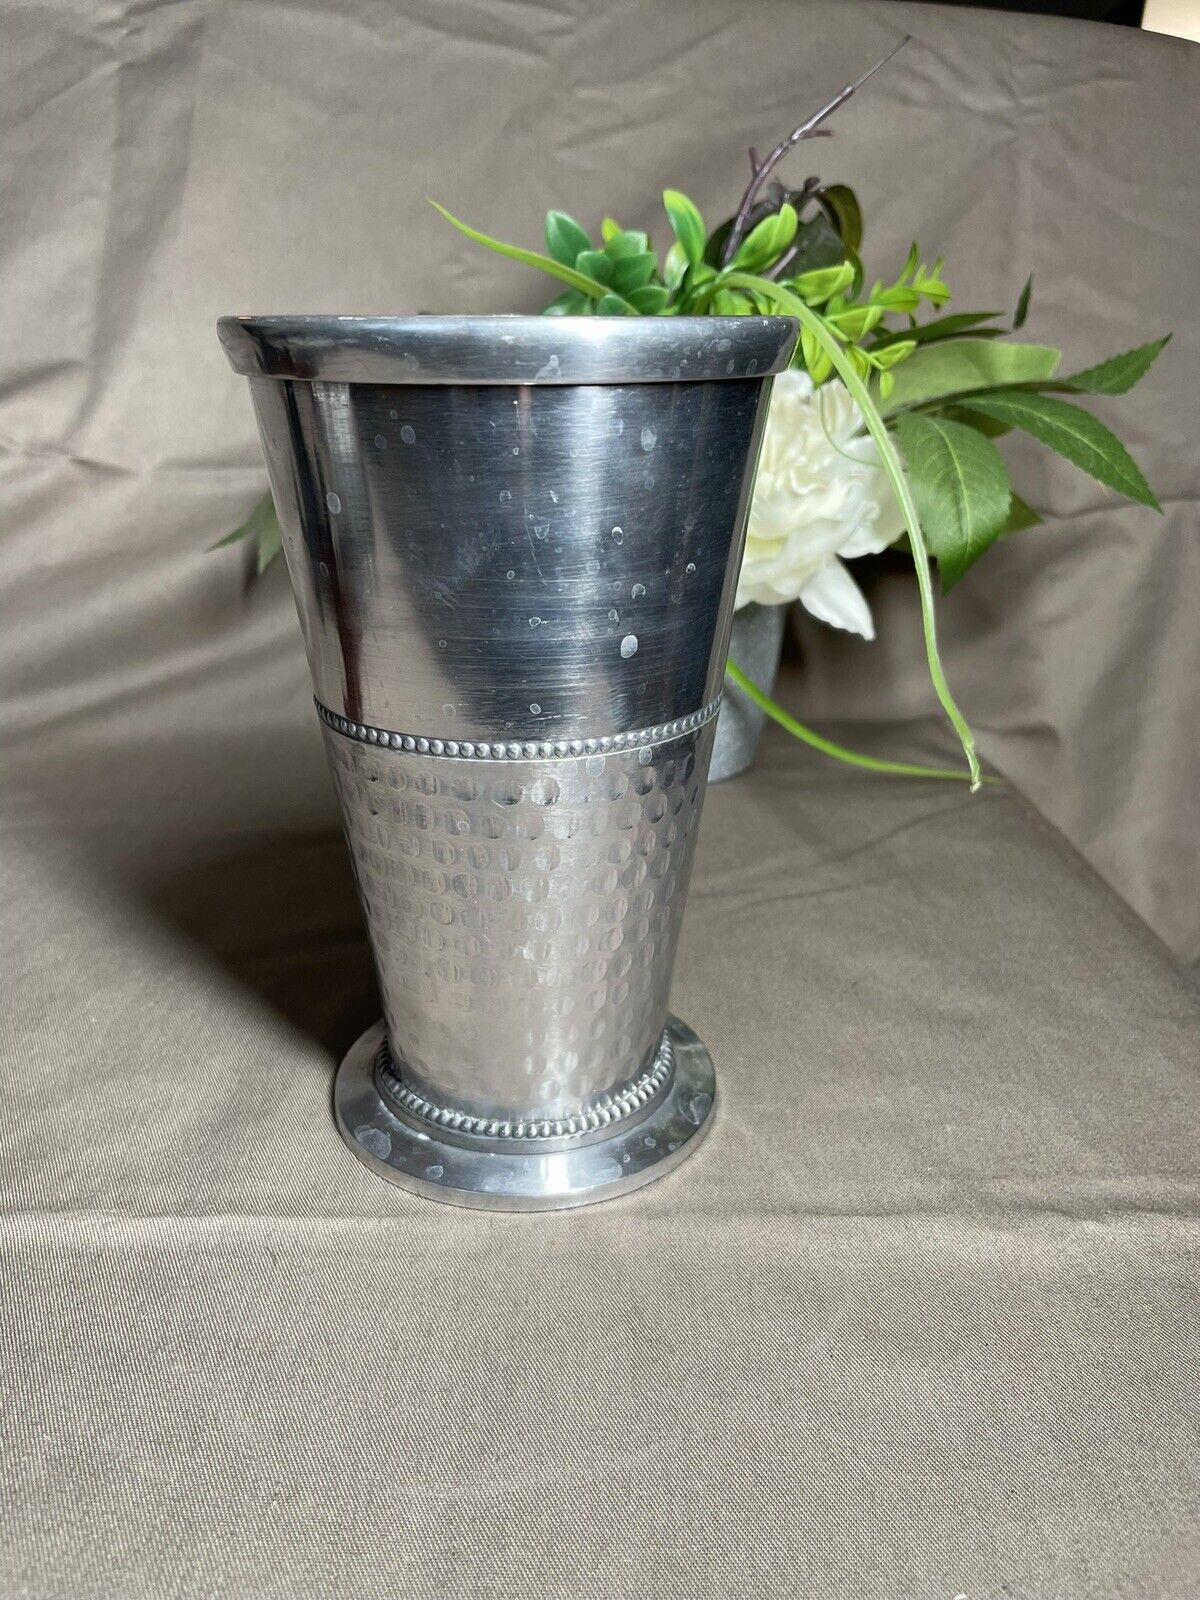  7” Decorative Vase Metal Silver Tone Mirrored Julep Orchid Vase by Debi Lilly